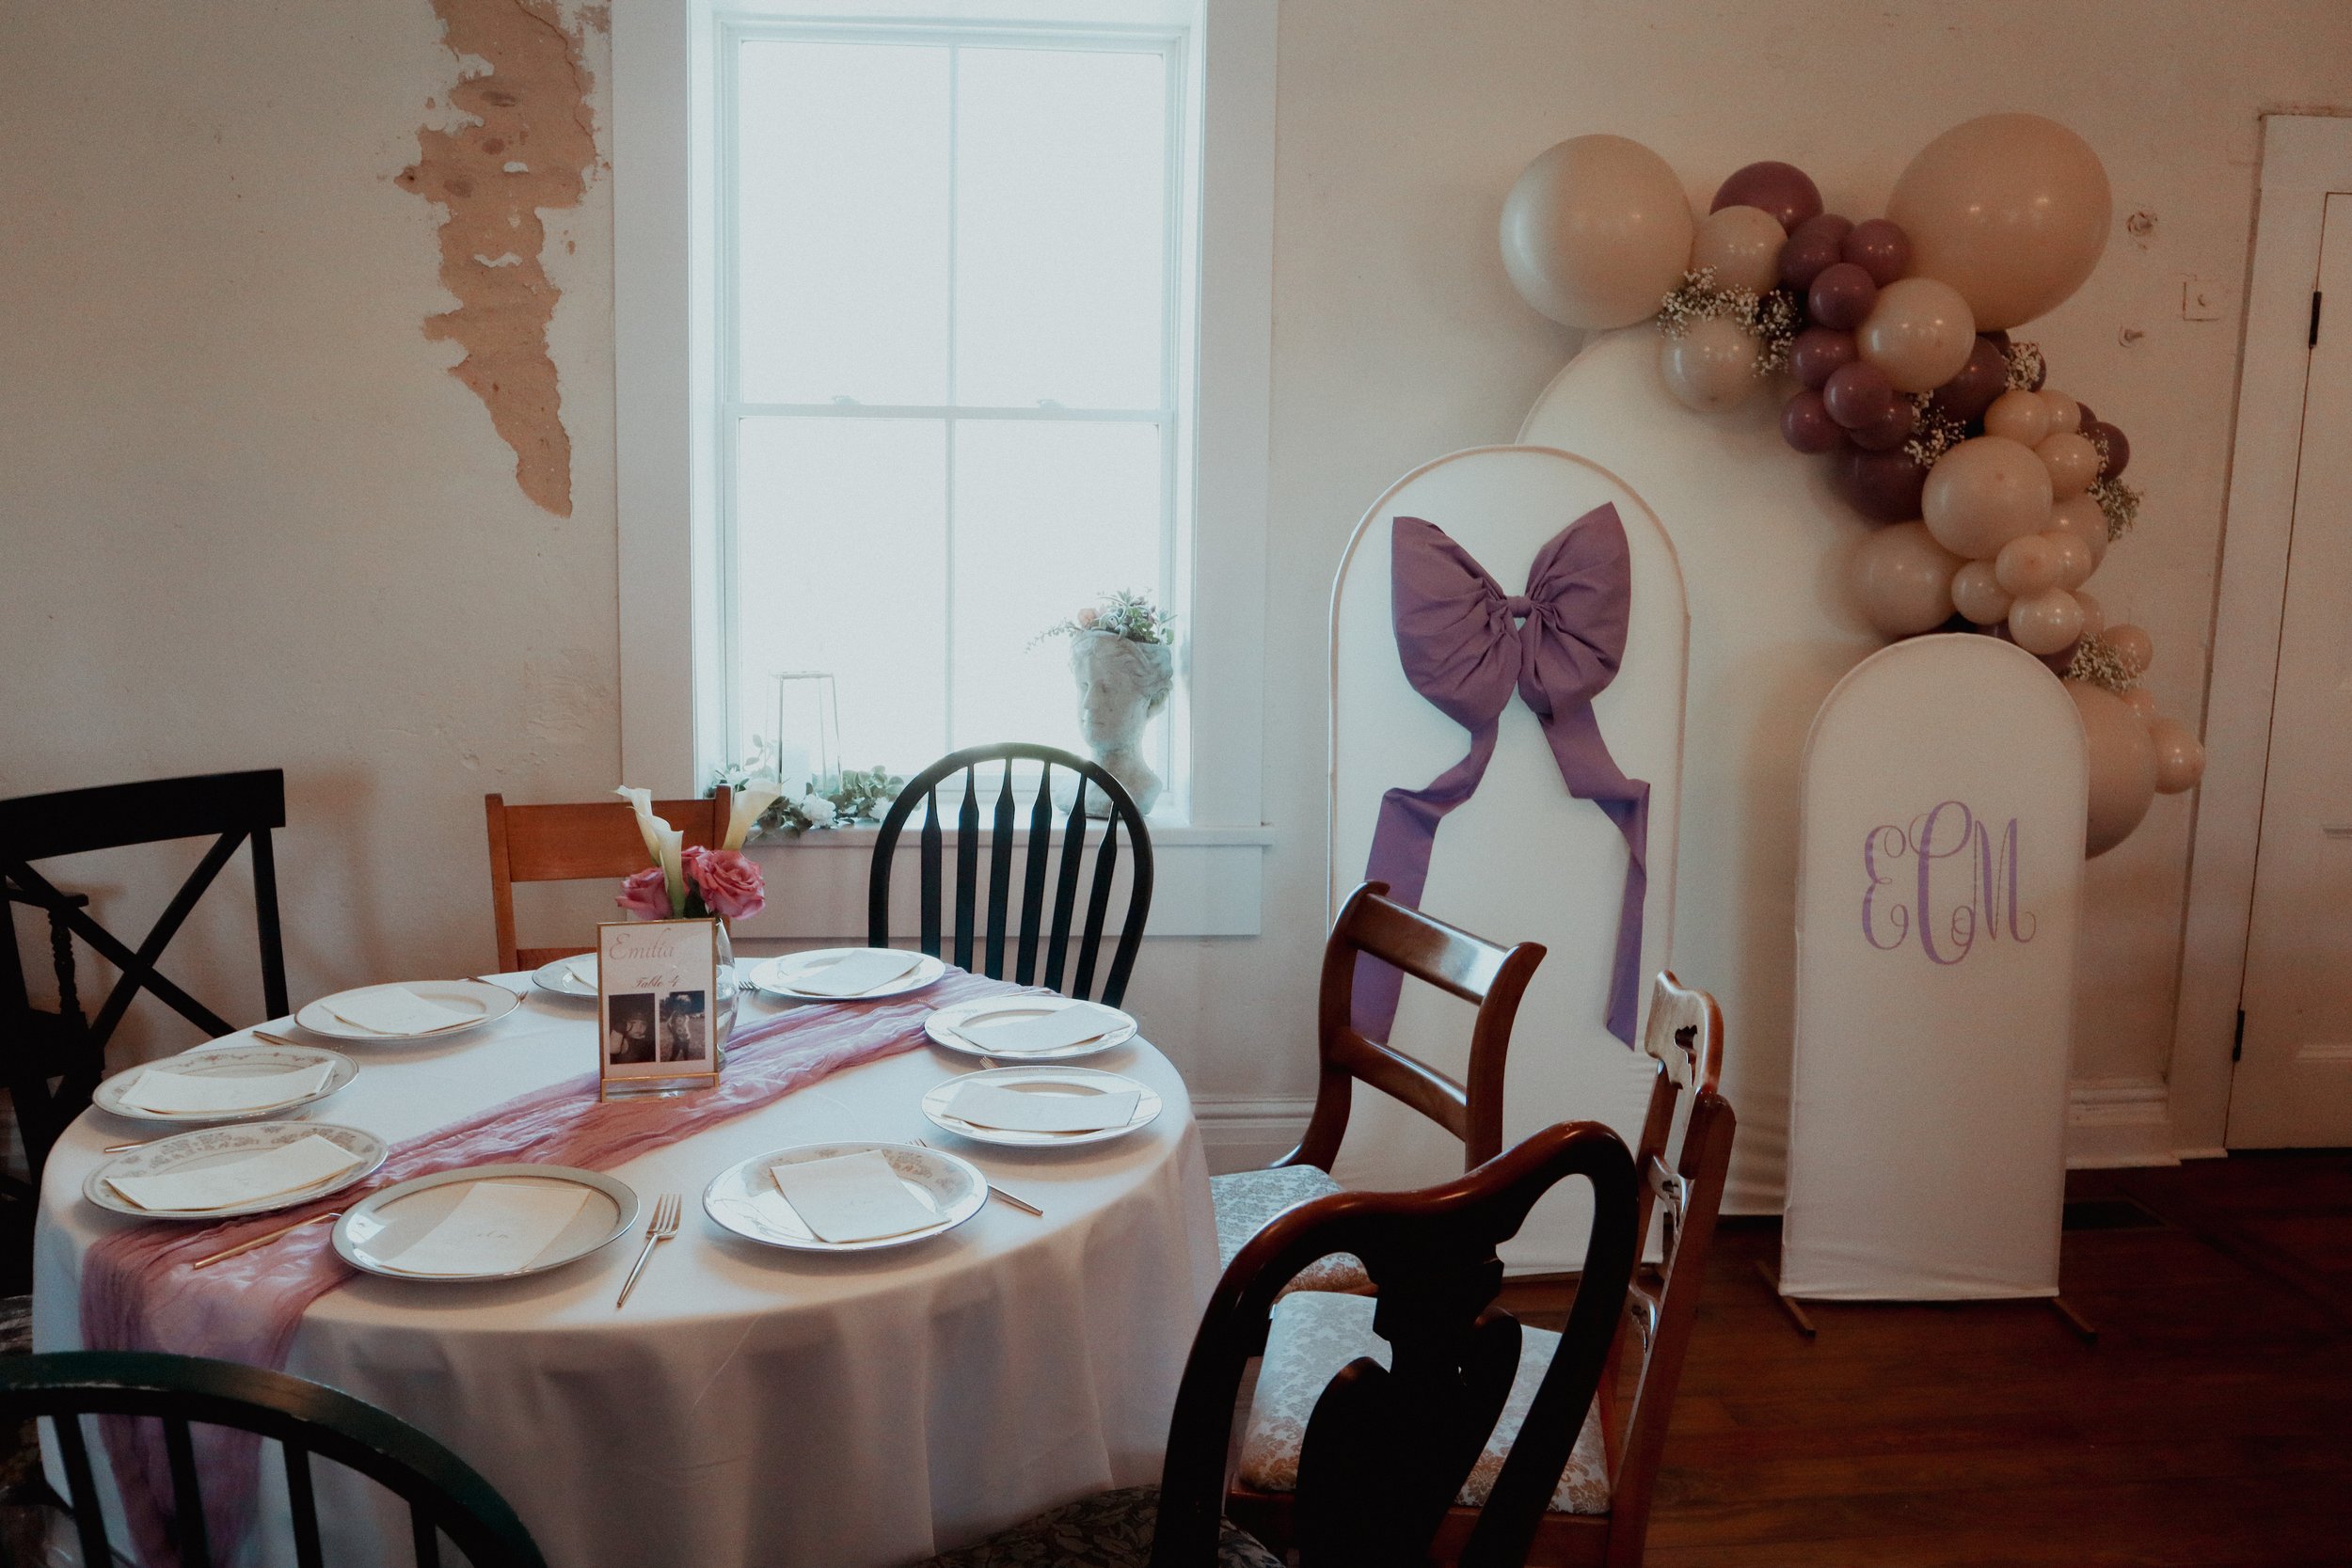 The Histoirc Dallas Jail Baby Shower Millie Table Scape.JPG